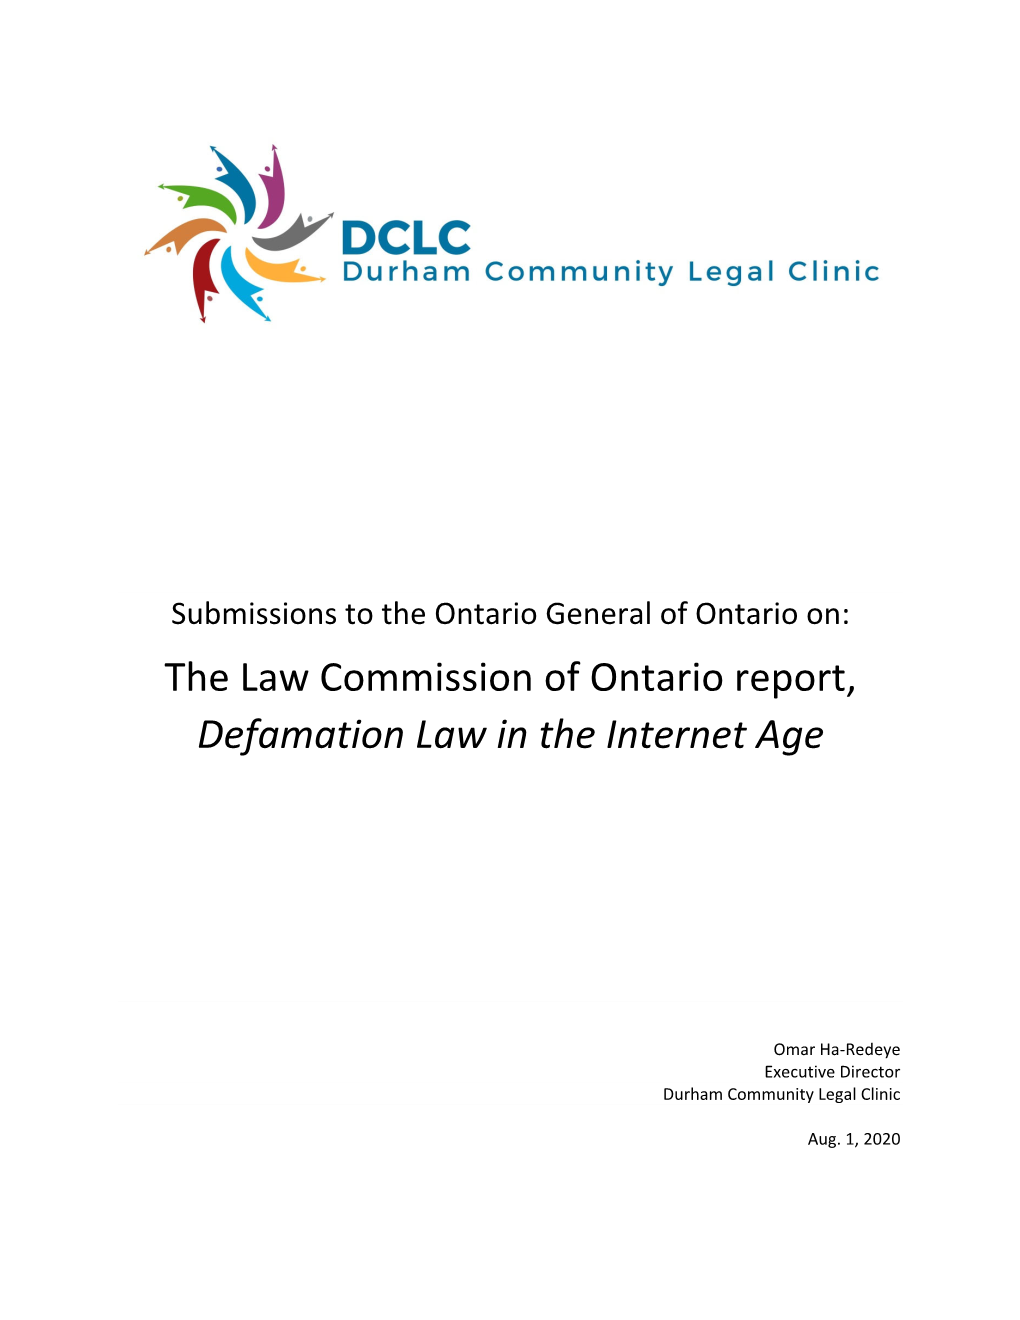 The Law Commission of Ontario Report, Defamation Law in the Internet Age